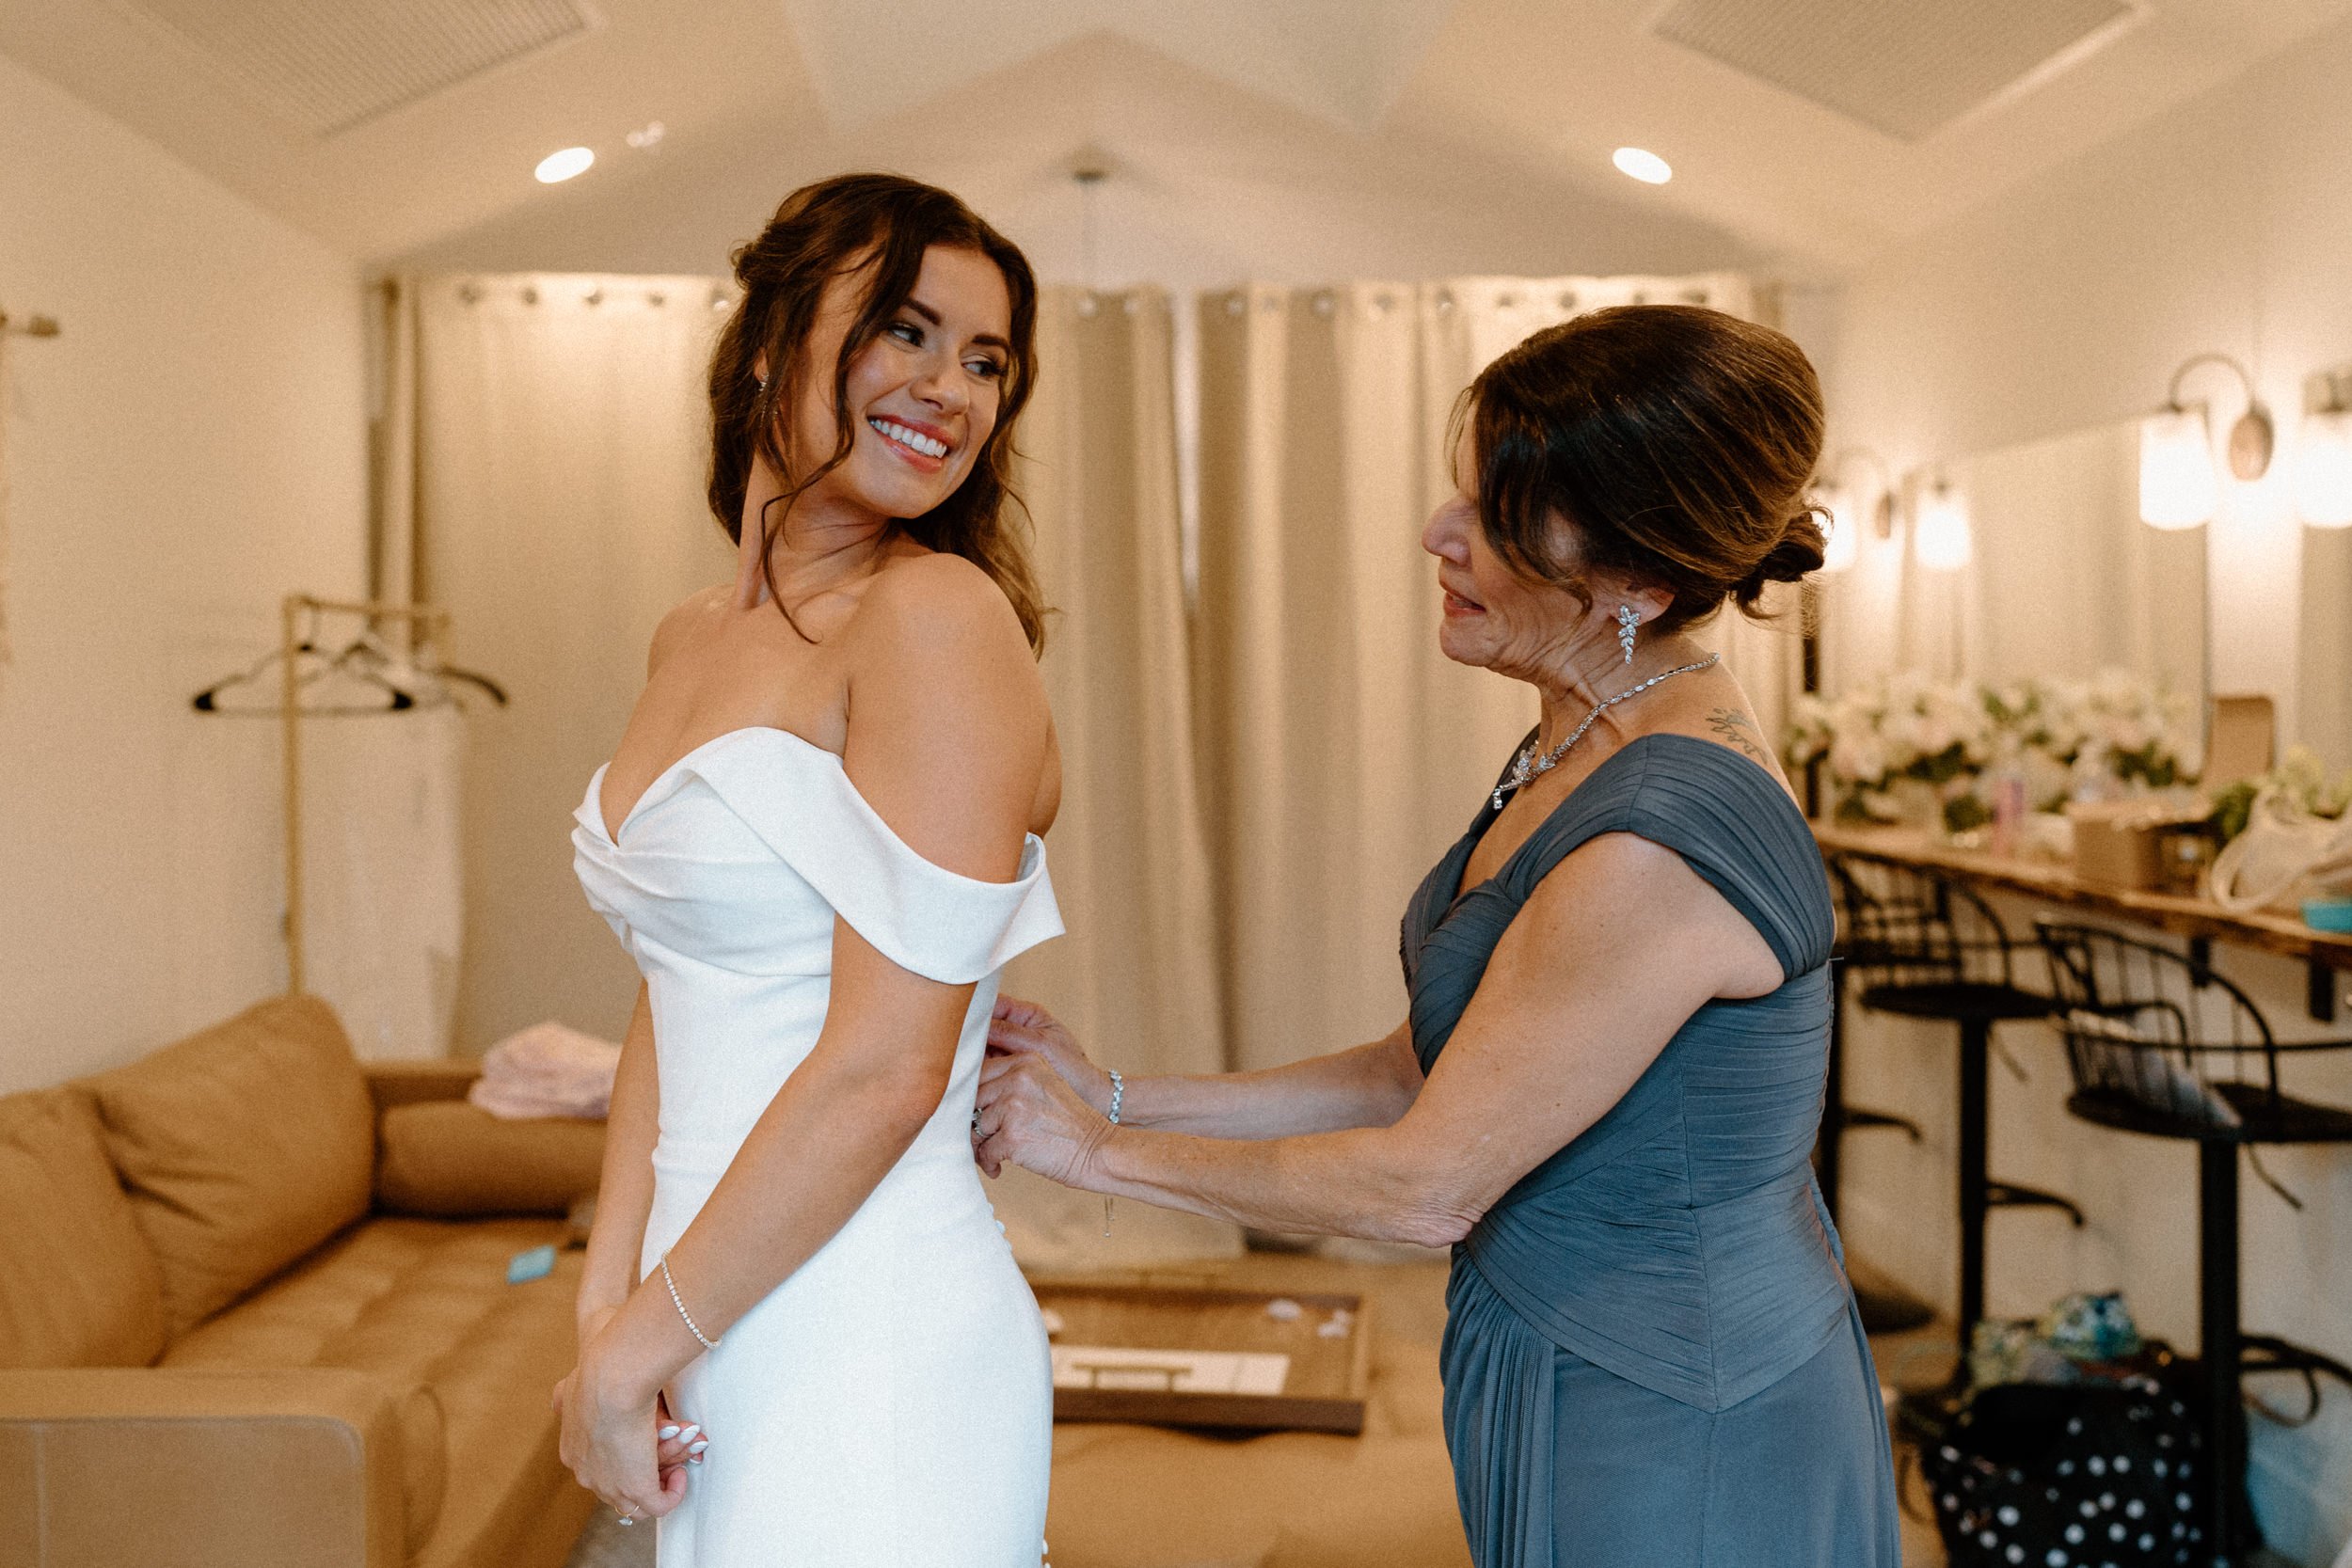 The bride smiles back at her mother as she helps button her wedding dress